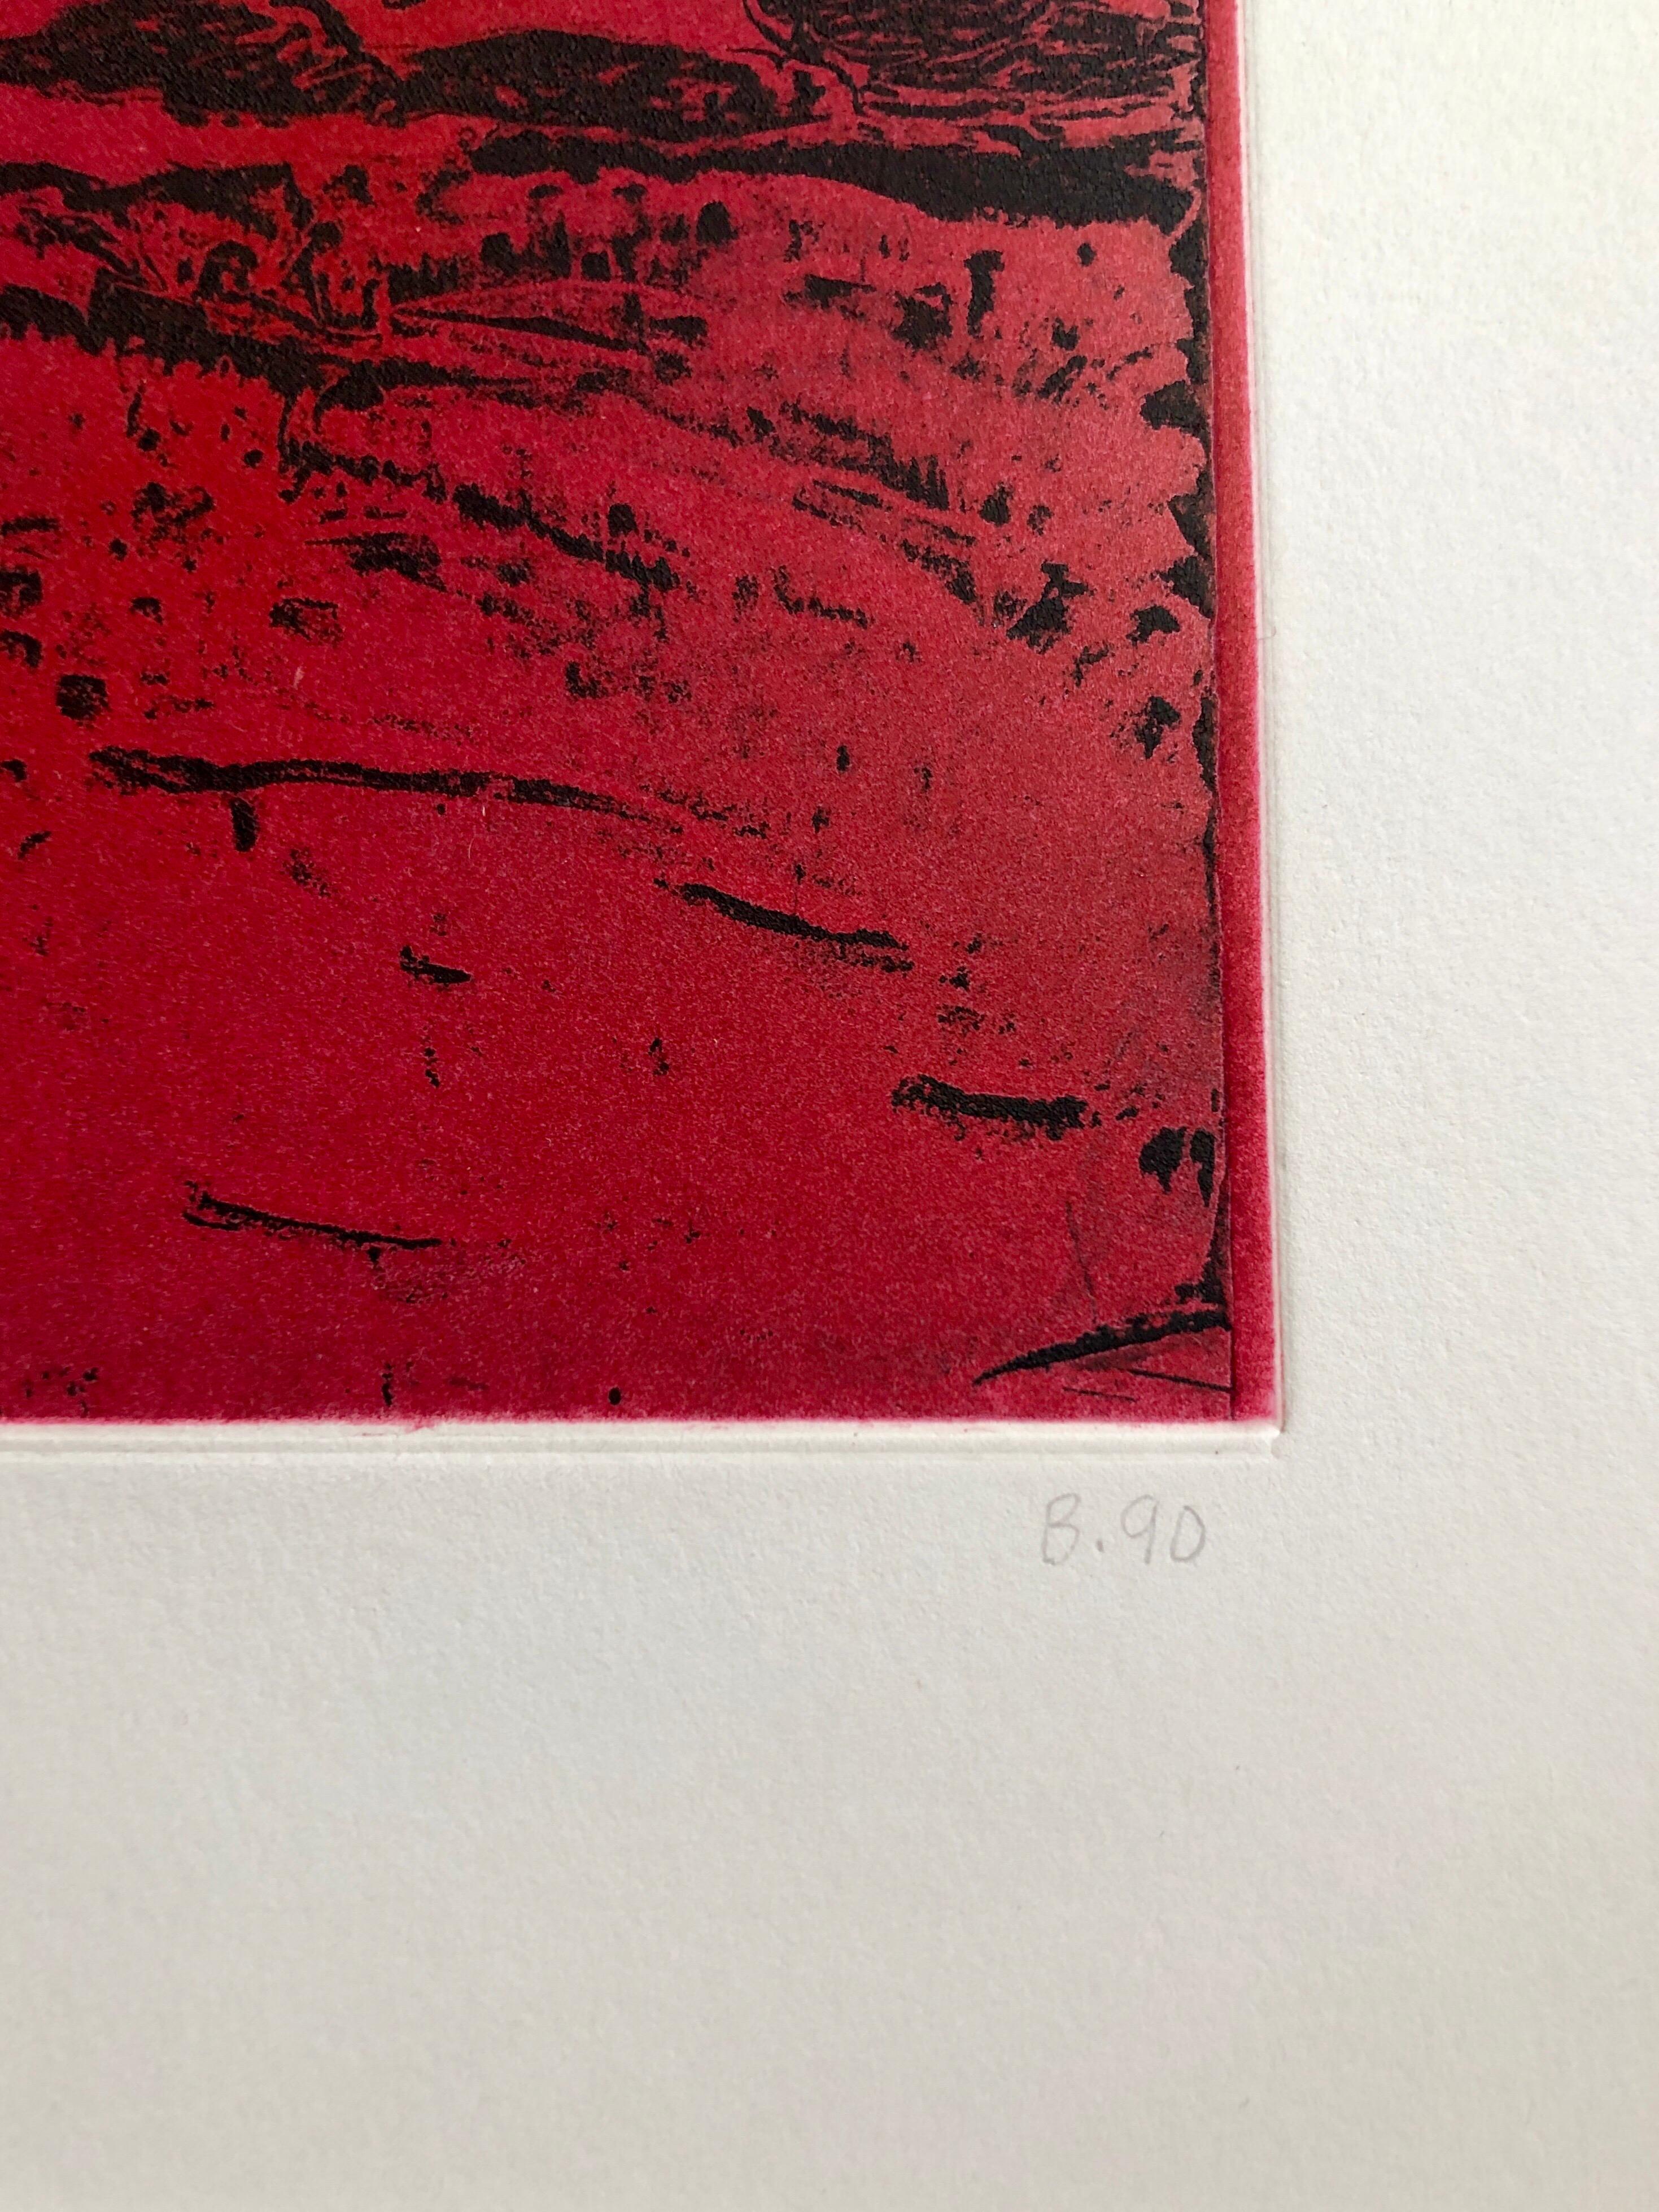 William Brice - Untitled #11 Two Forms Red Ground Abstract ...